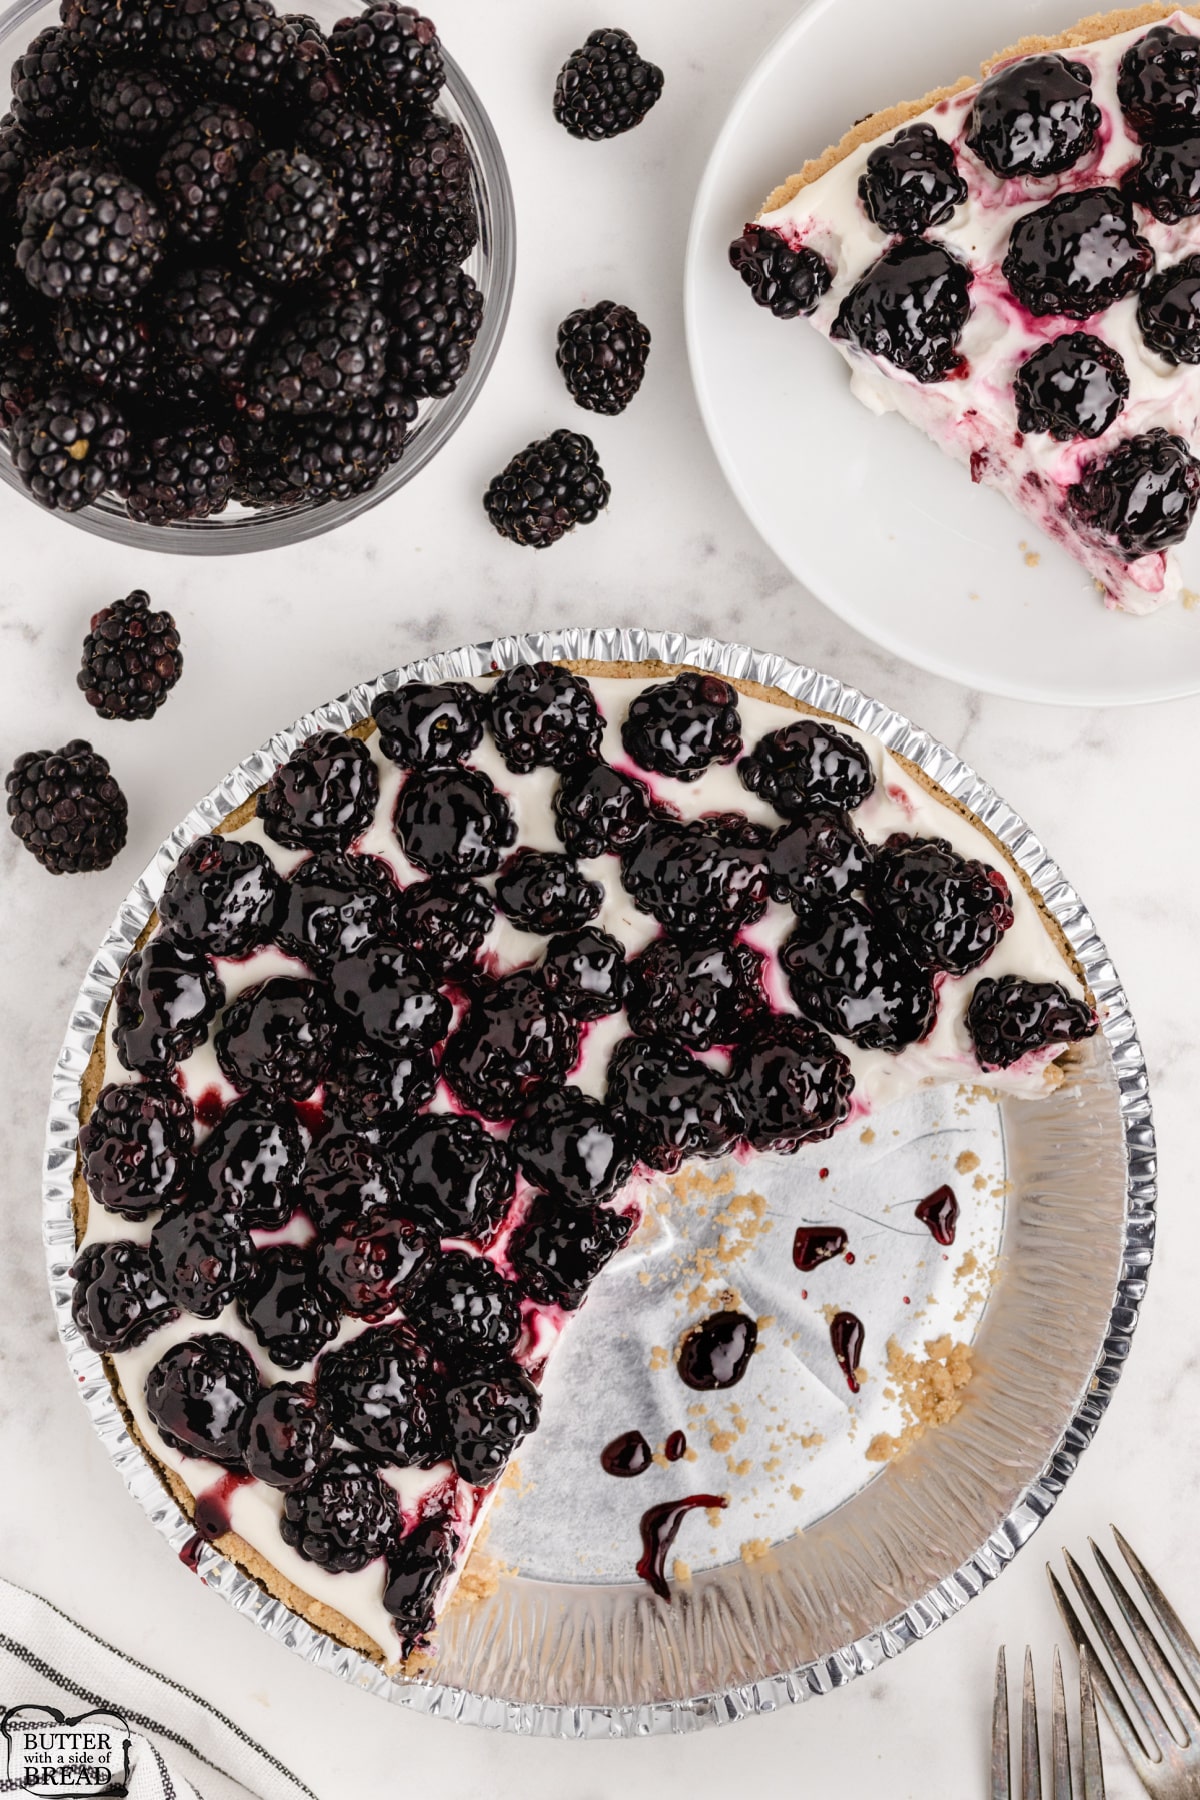 No-Bake Blackberry Cheesecake is made with a sweet cream cheese layer and fresh blackberries. Only a few ingredients needed to make this simple no-bake cheesecake recipe. 